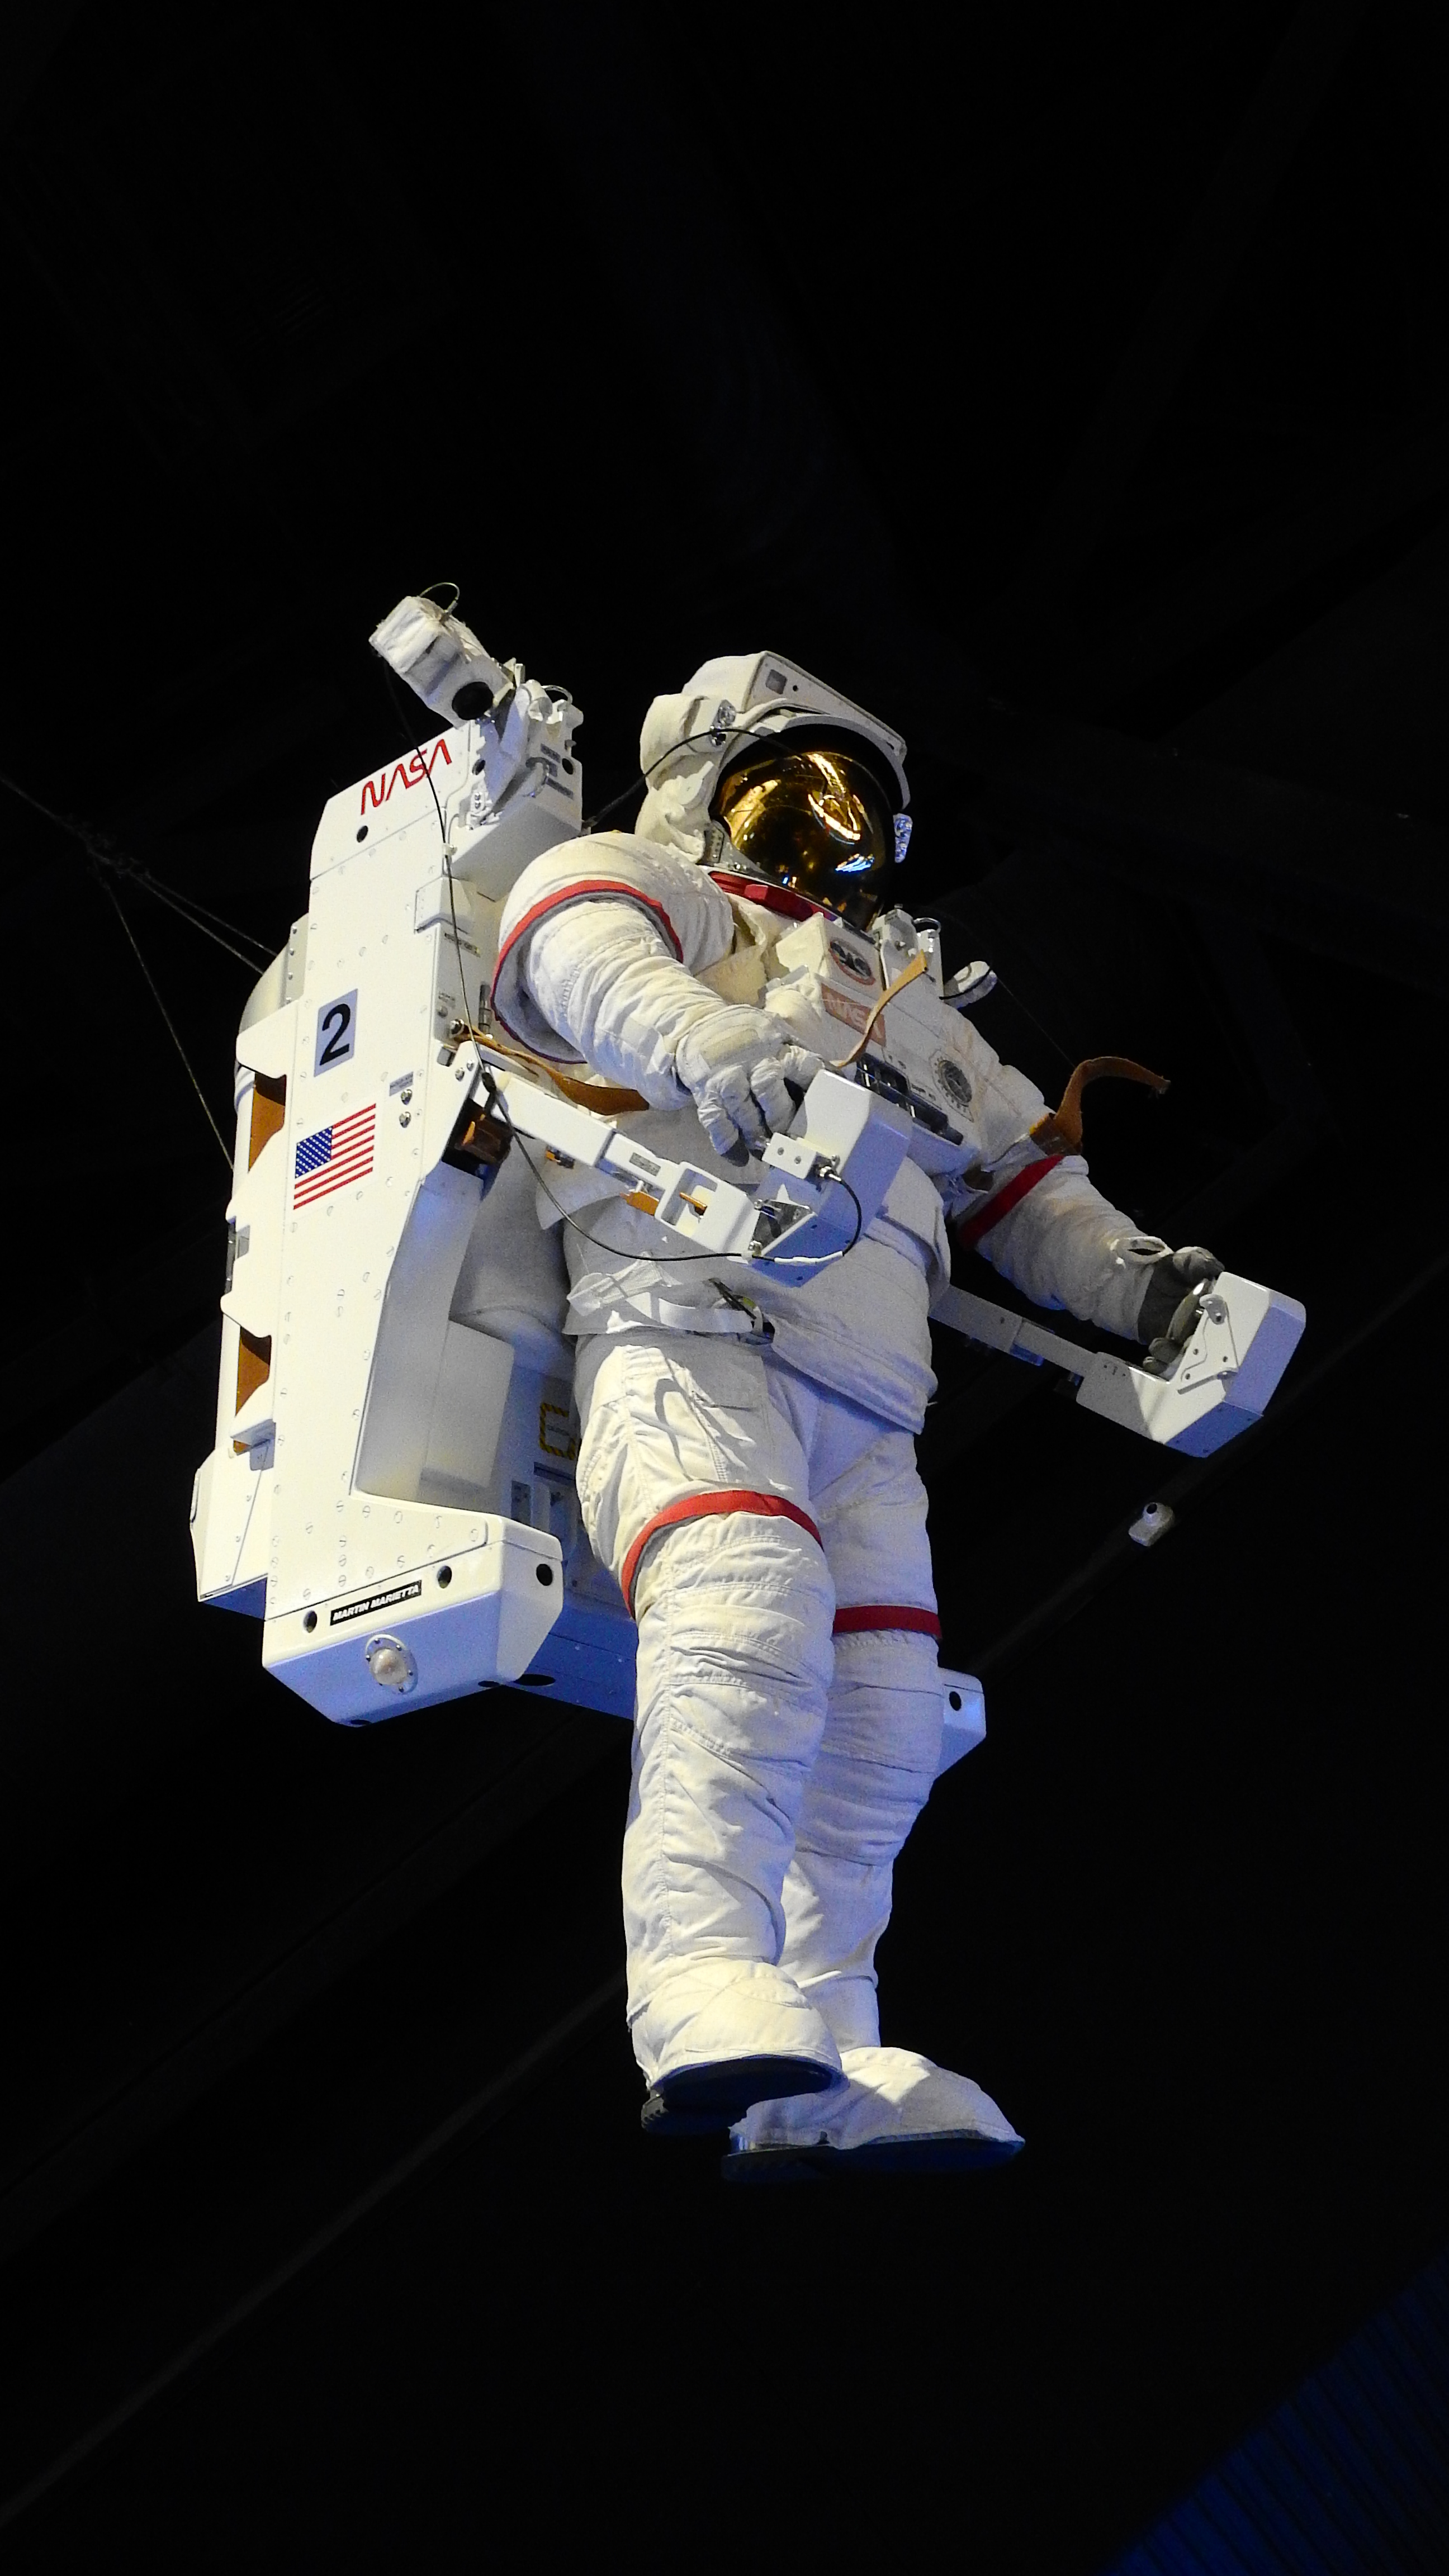 File:Astronaut, cosmonaut space suit model in Kennedy Space Center ...